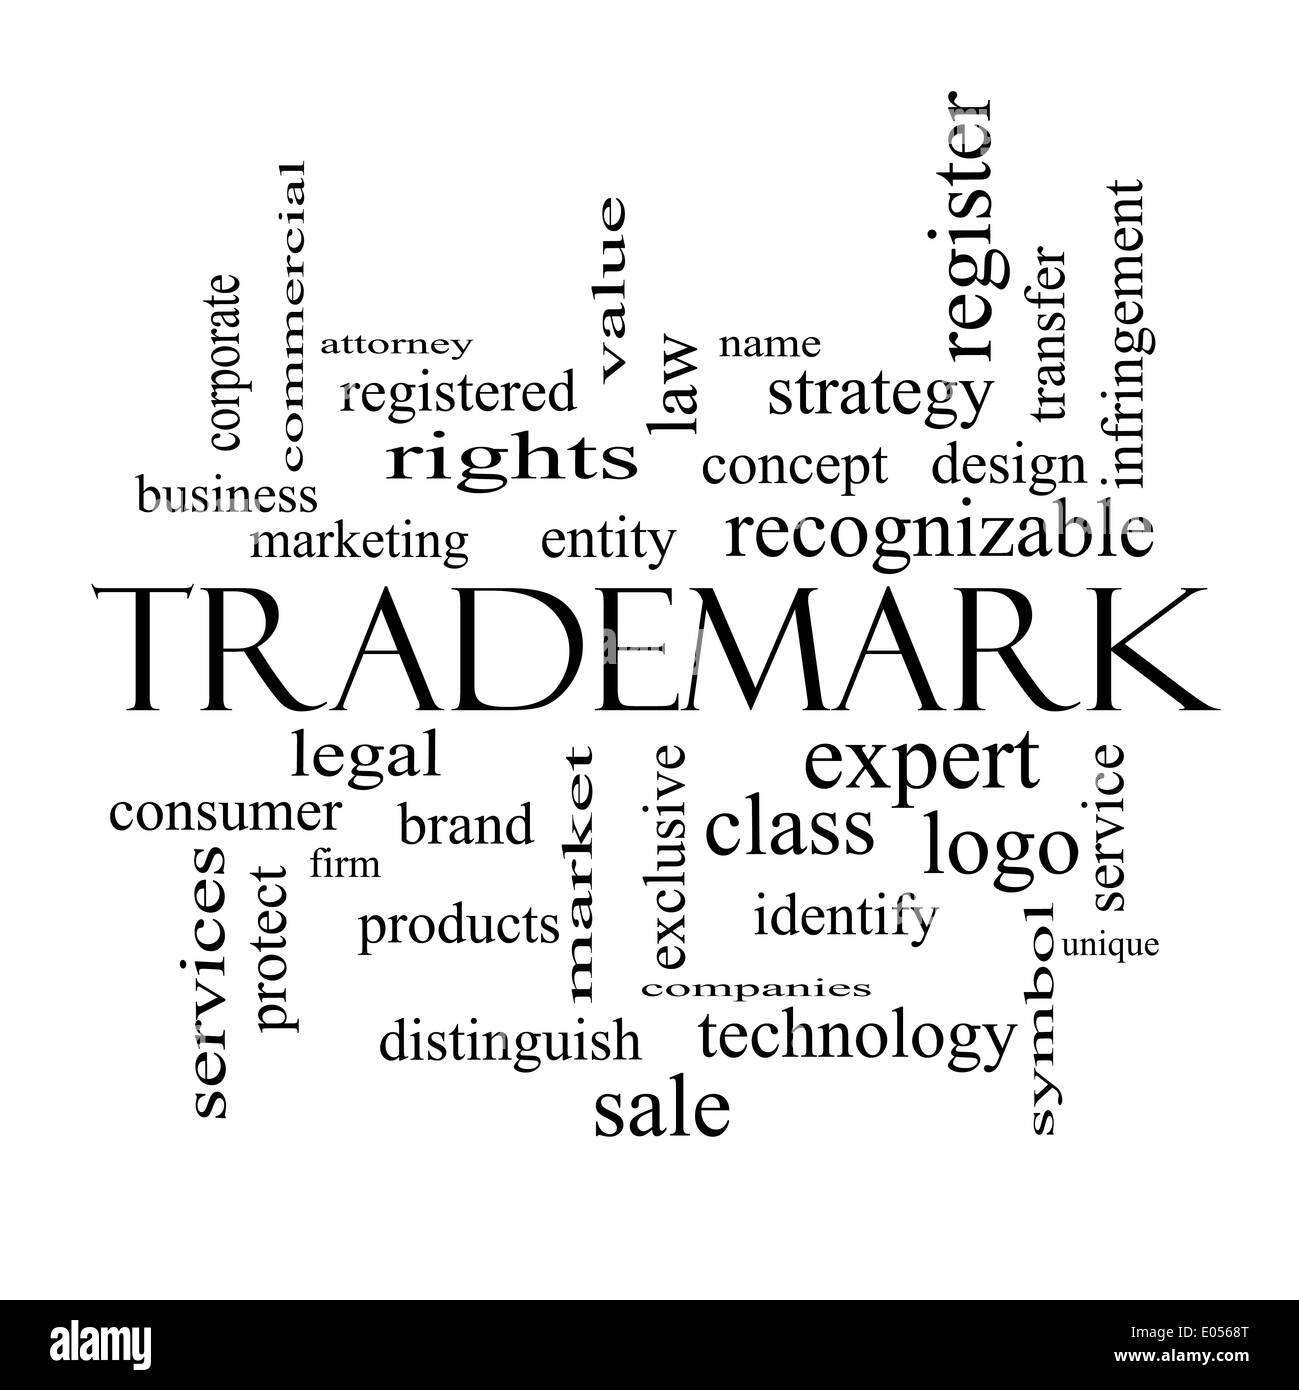 Trademark Word Cloud Concept in black and white with great terms such as brand, logo, legal and more. Stock Photo